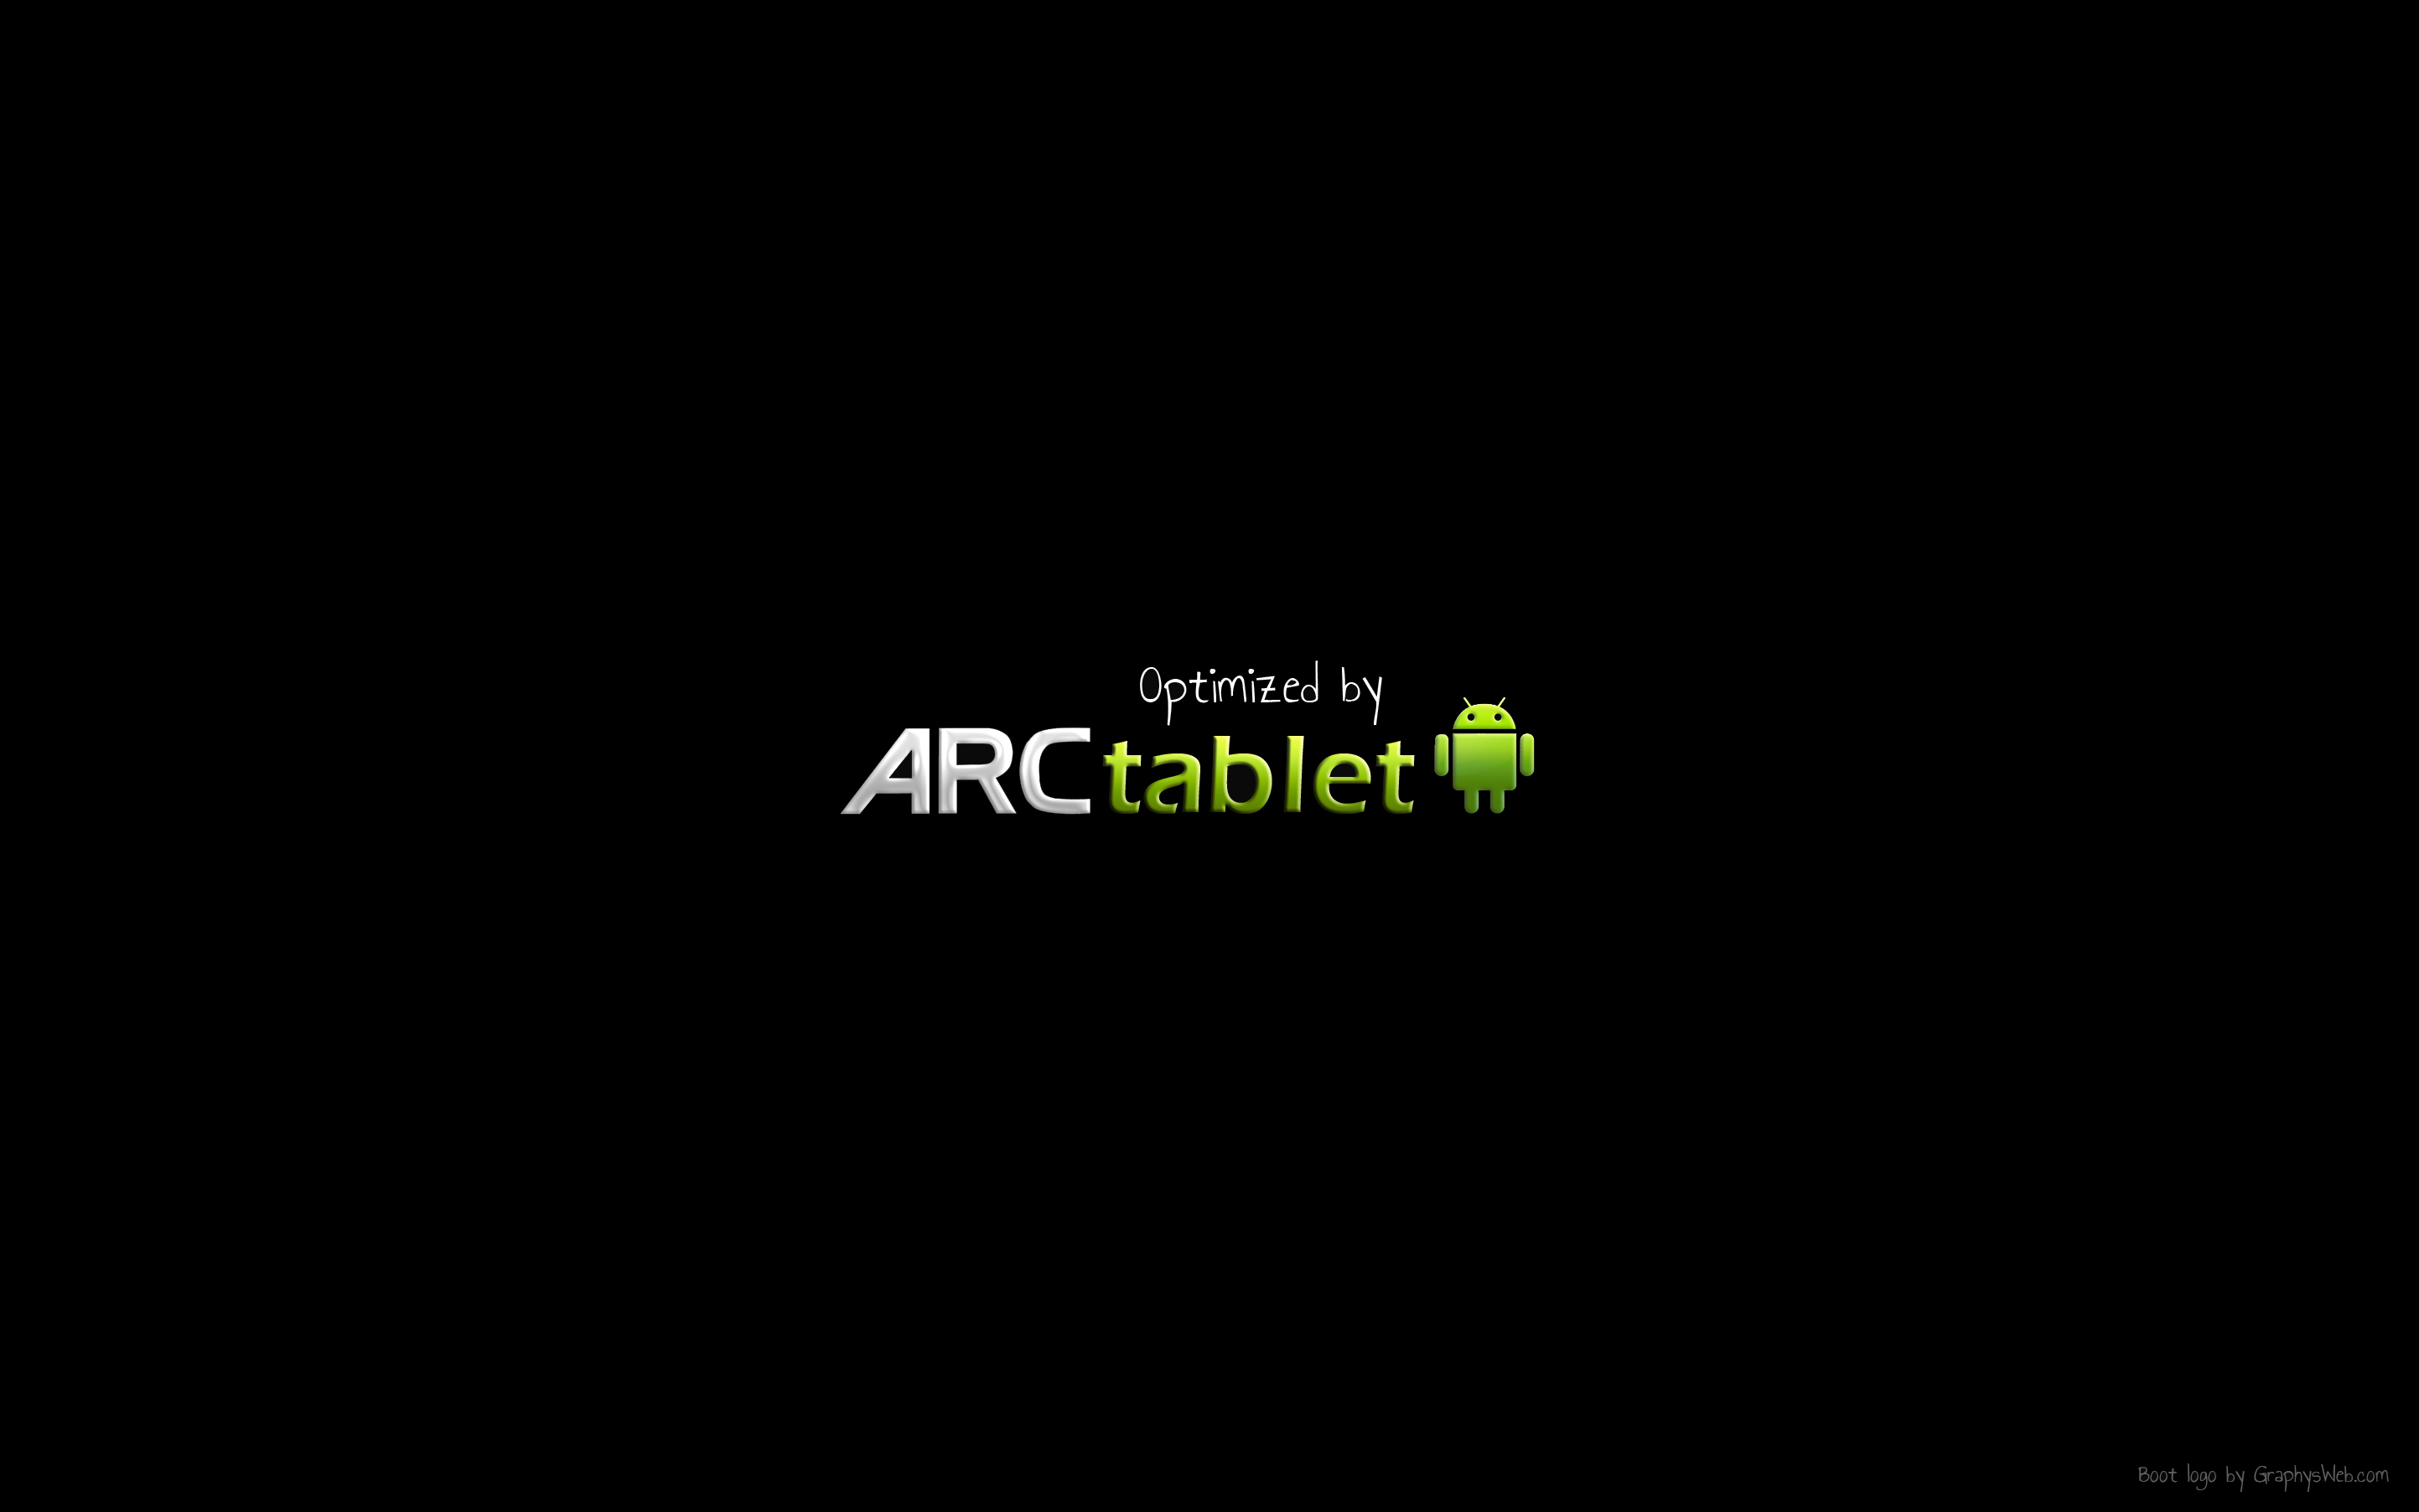 arctablet boot logo by graphys